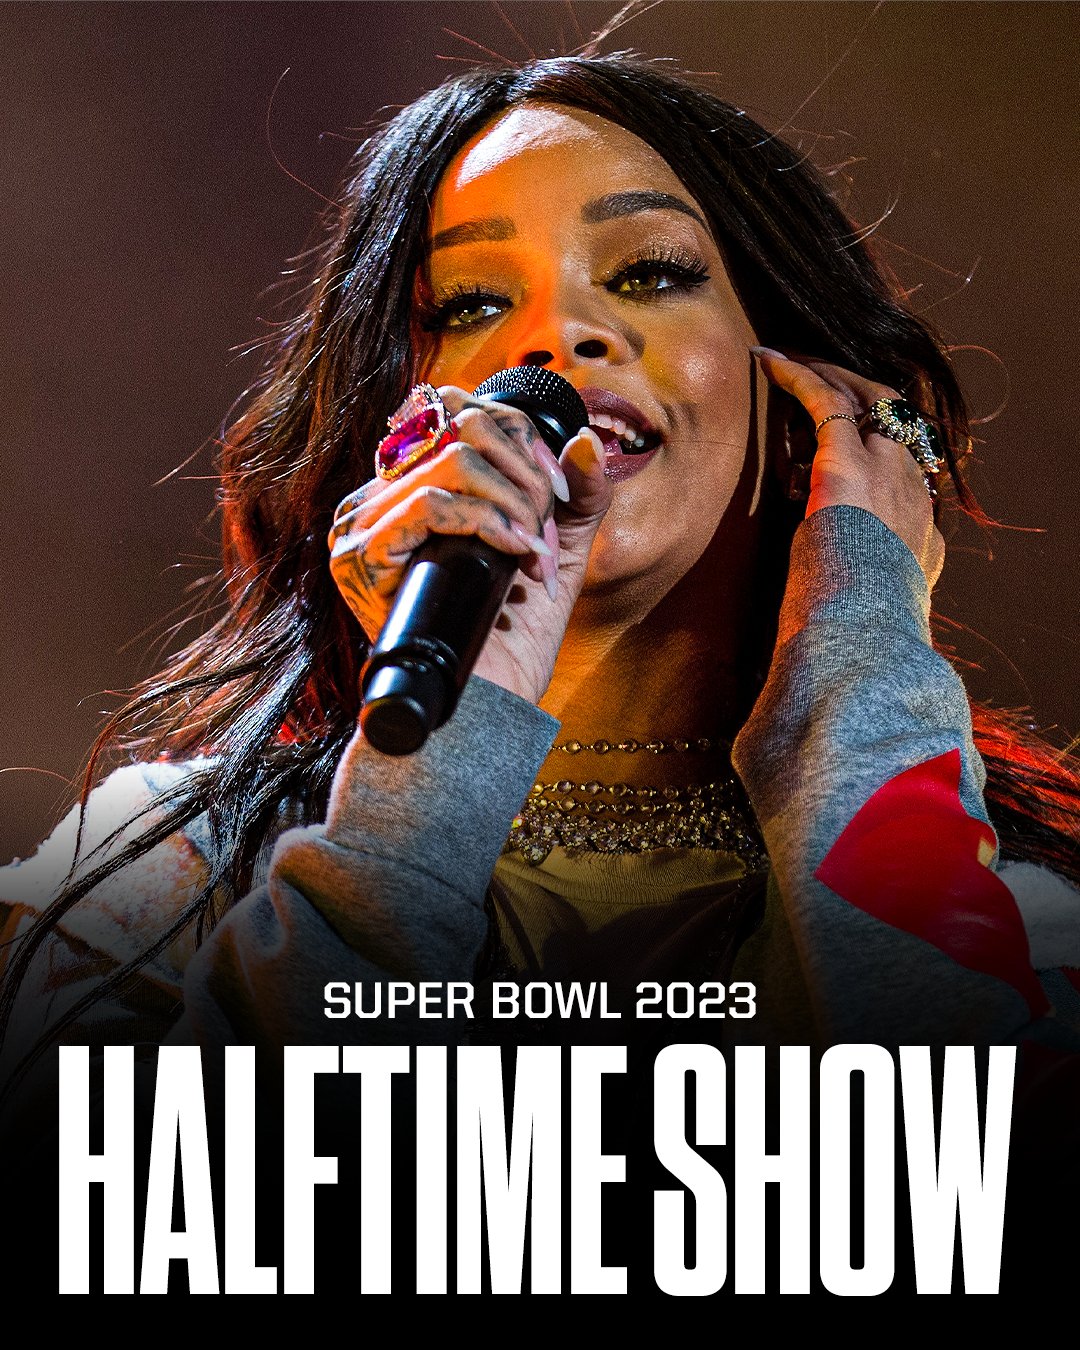 ESPN on Twitter: "The NFL announced Rihanna will perform at the 2023 Super Bowl 🔥 https://t.co/R3HGERmcIx" / Twitter